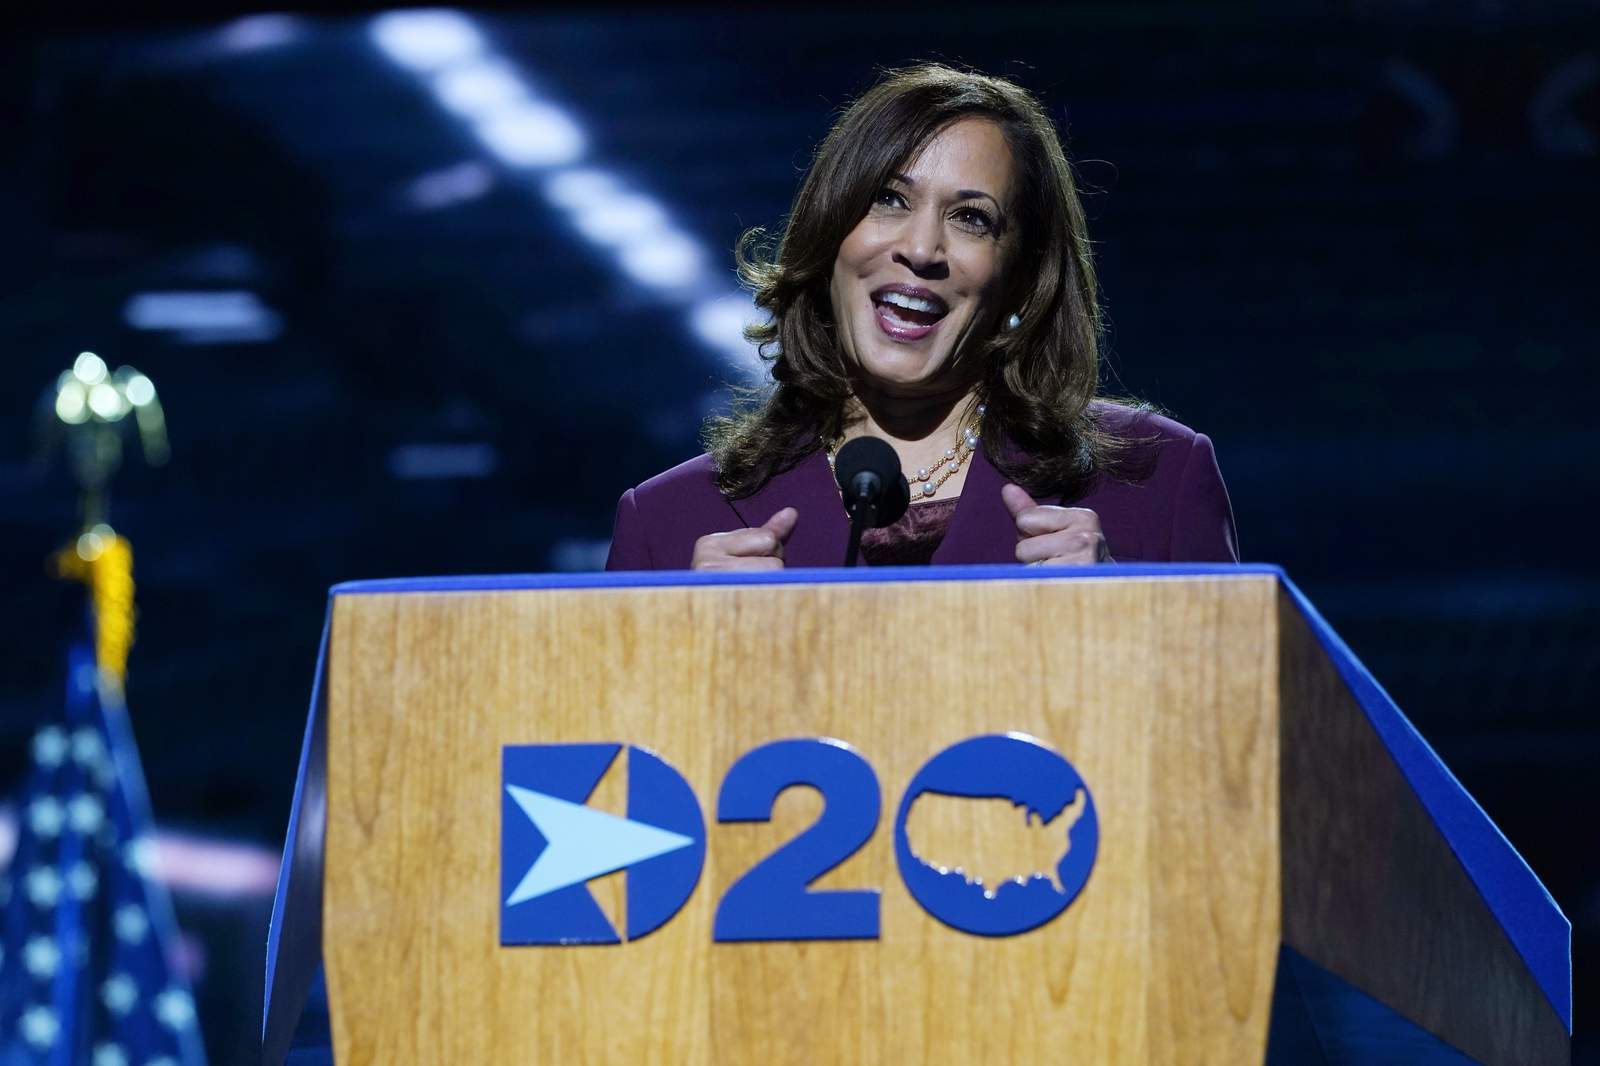 Harris will be Democrats' main counter to Trump on Thursday